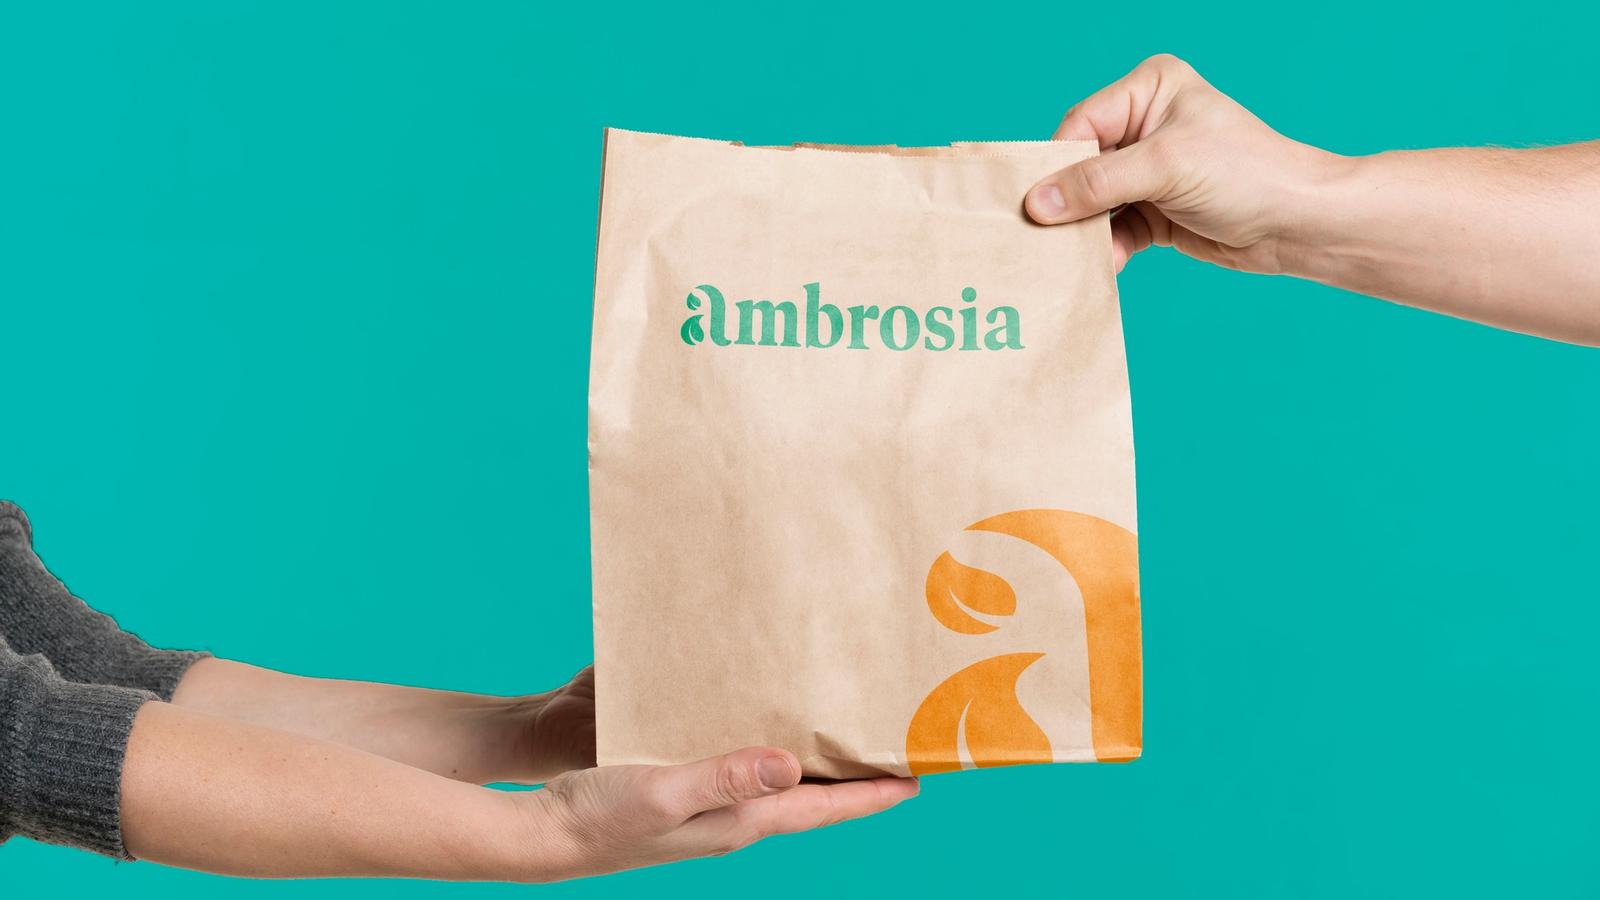 Ambrosia Health Food // Delivery Service Packaging